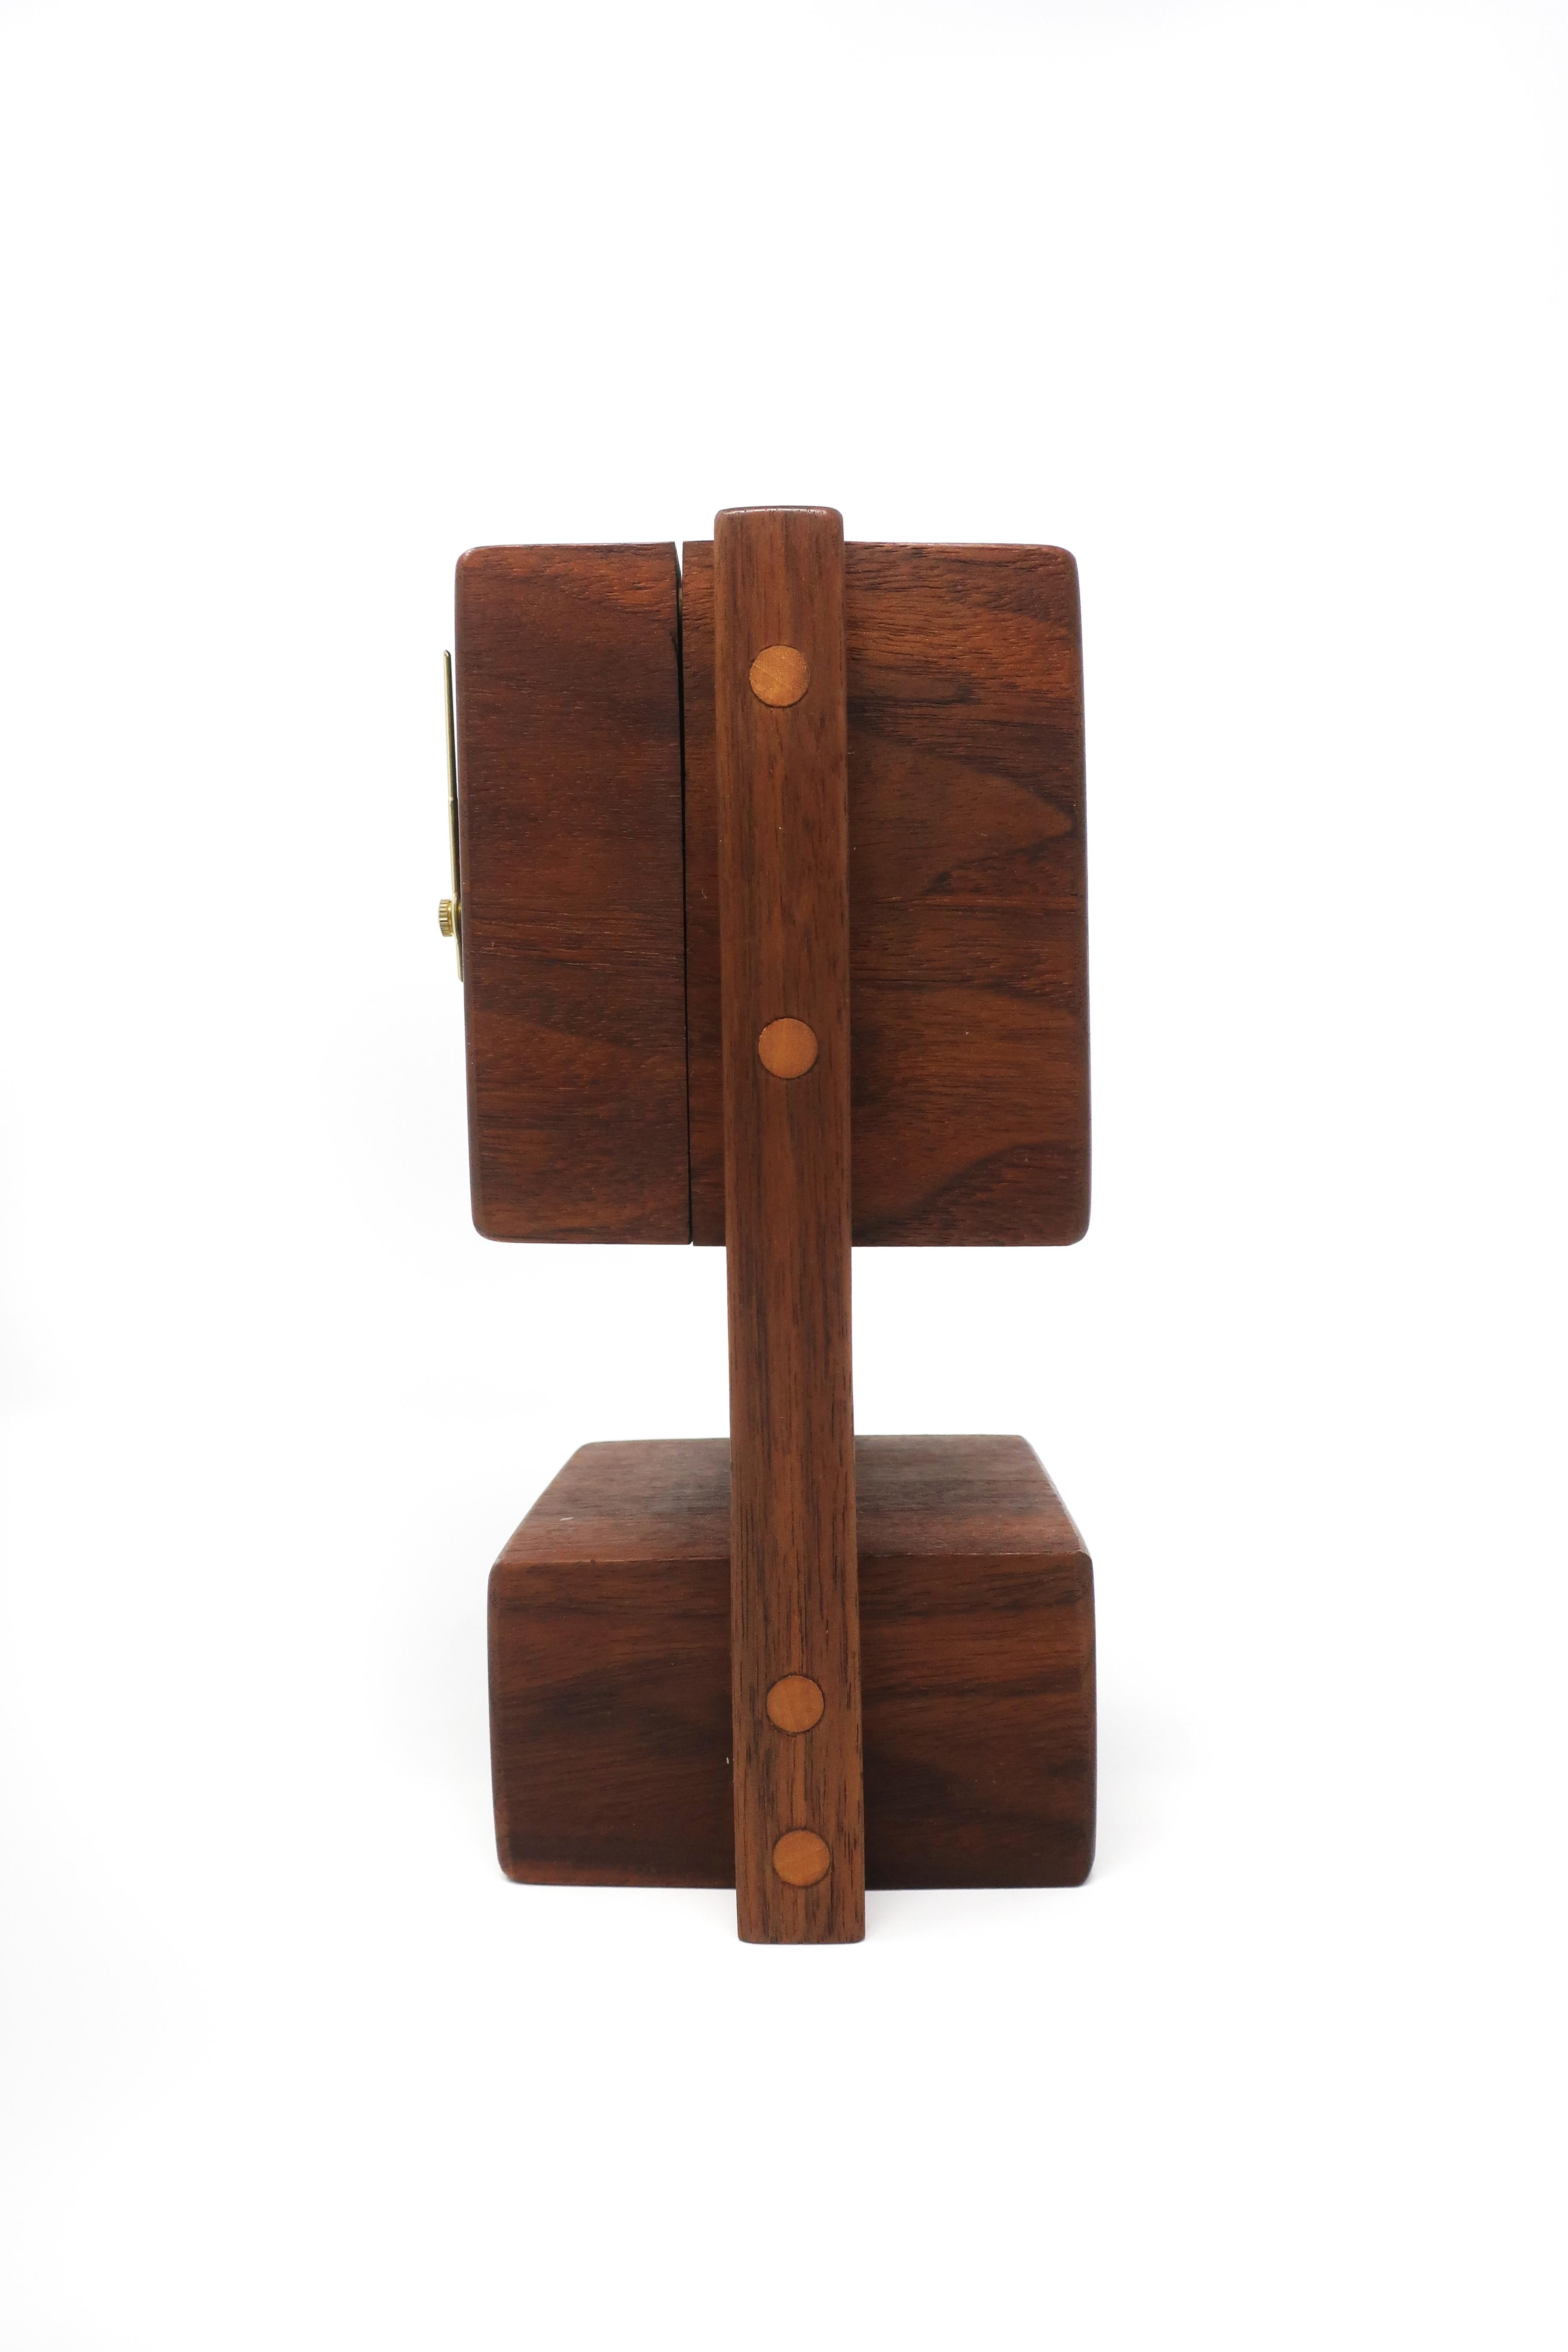 Vintage Handmade Teak Mantle Clock In Good Condition For Sale In Brooklyn, NY